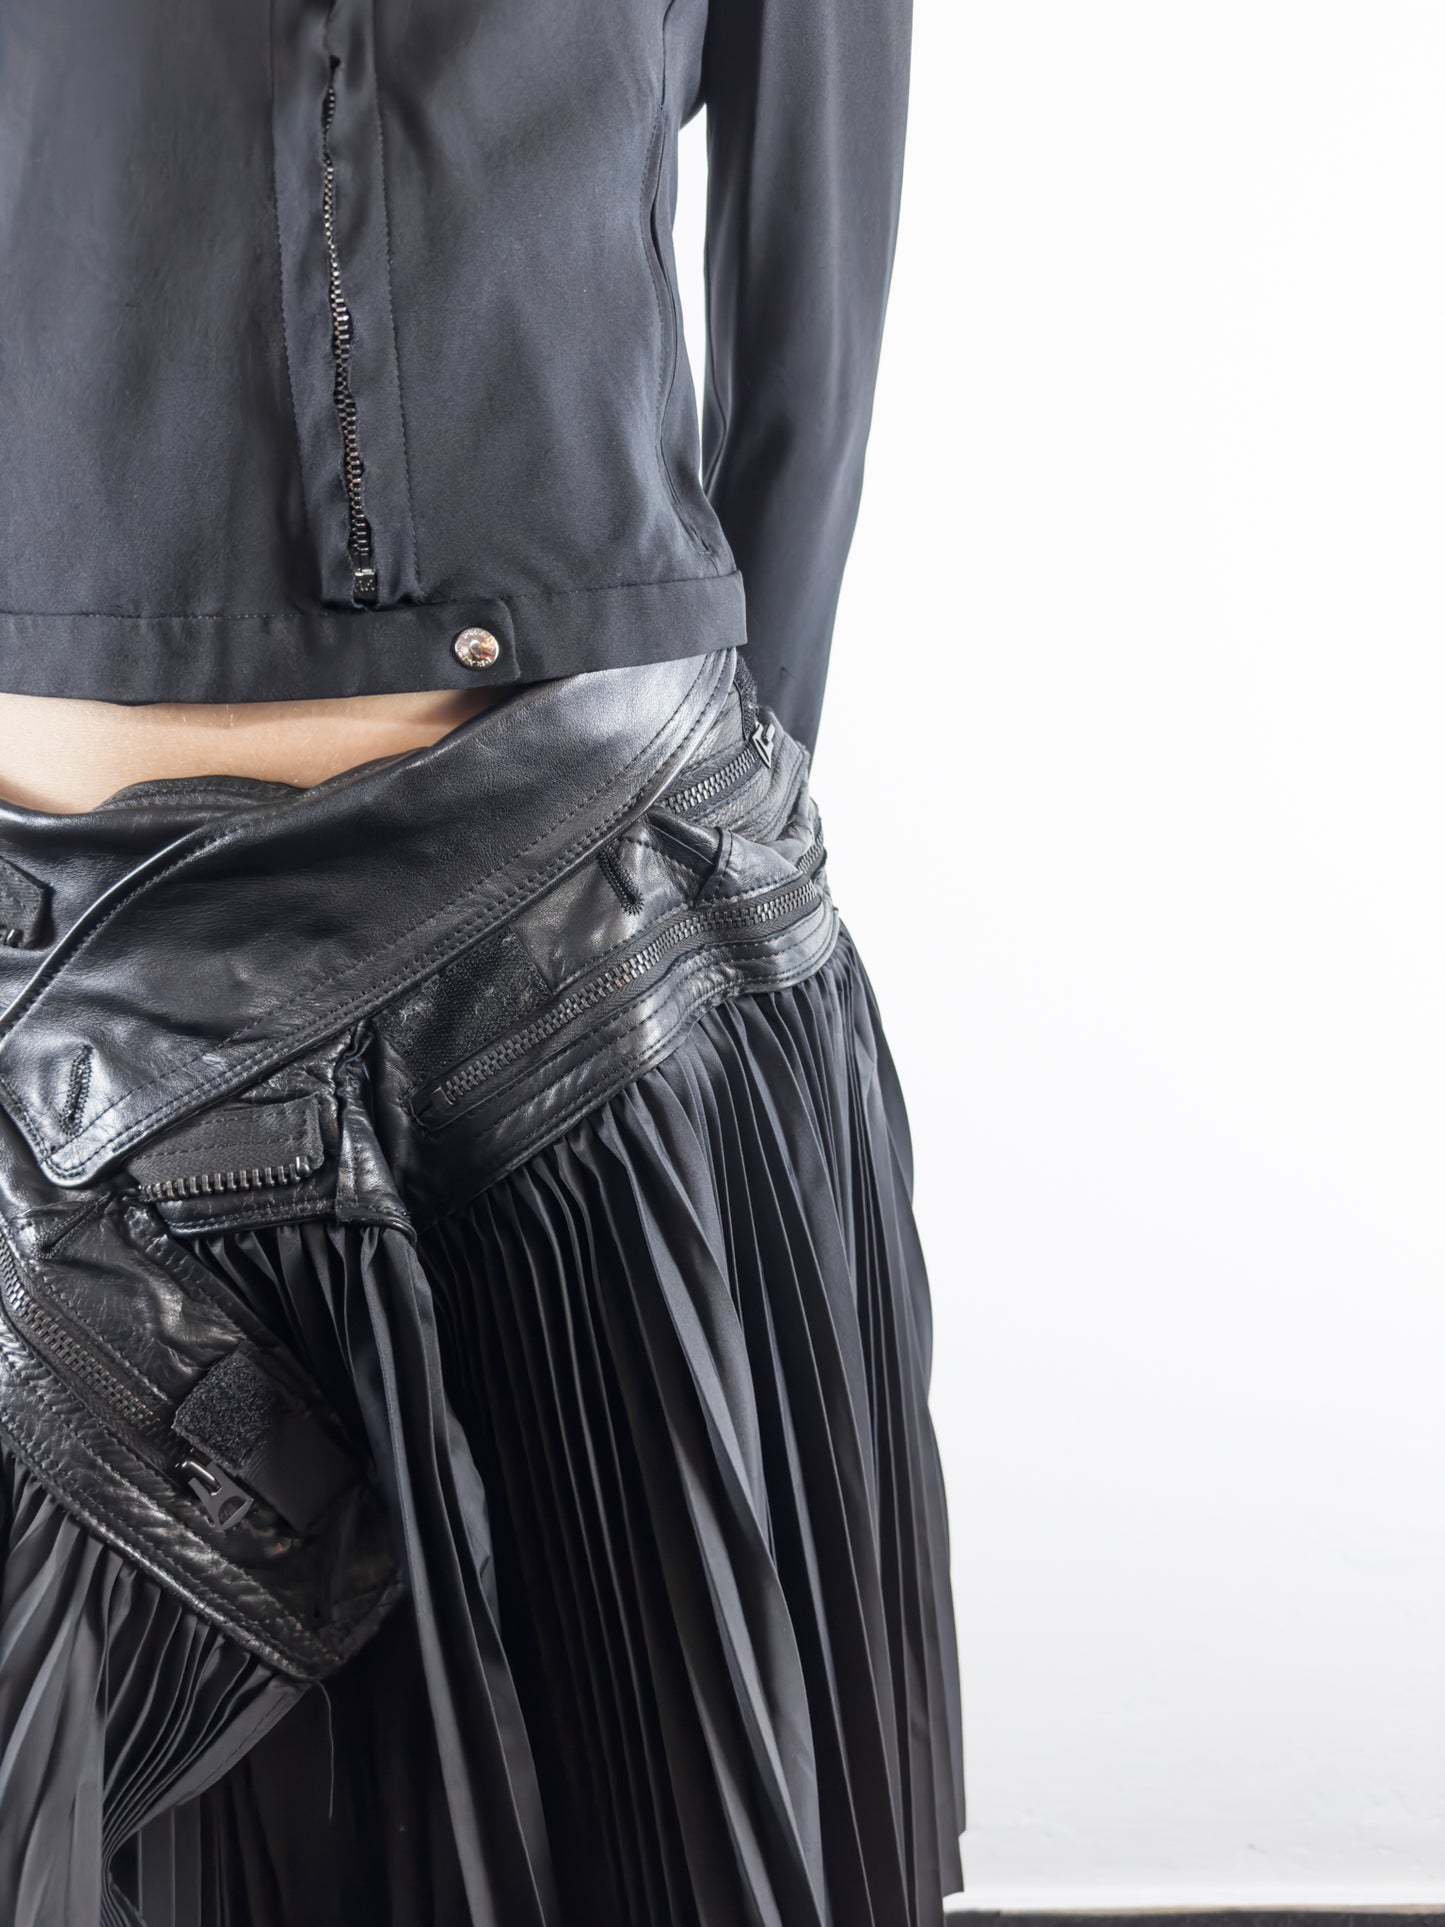 S/S 2006 Reconstructed Pleated Skirt (S)